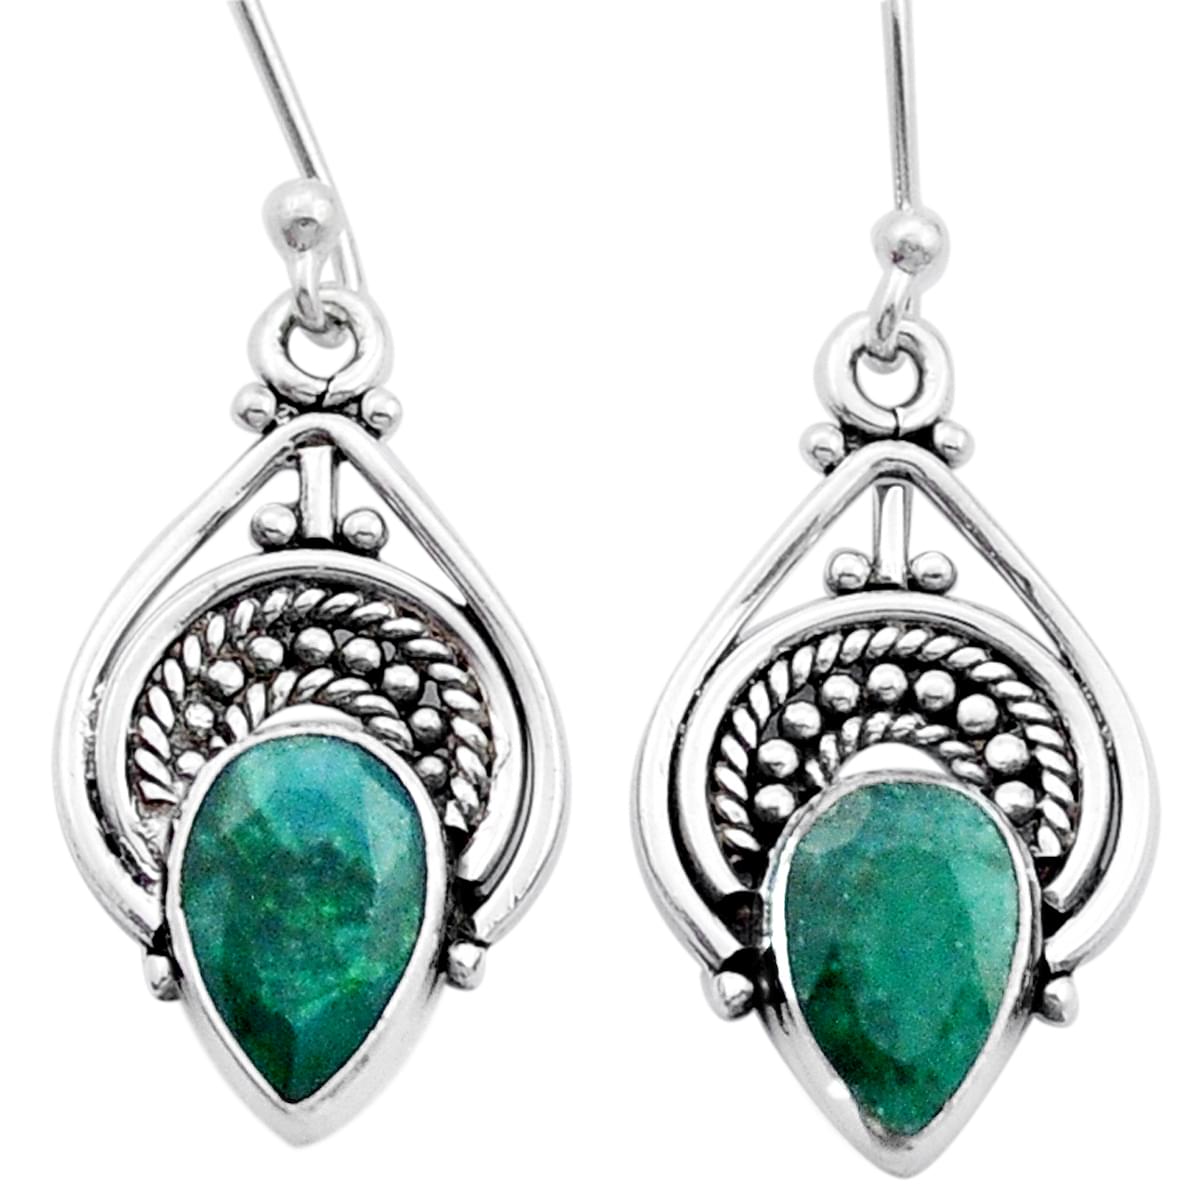 WHOLESALE 21PR 925 SILVER PLATED FACETED GREEN EMERALD HOOK EARRING LOT F870 